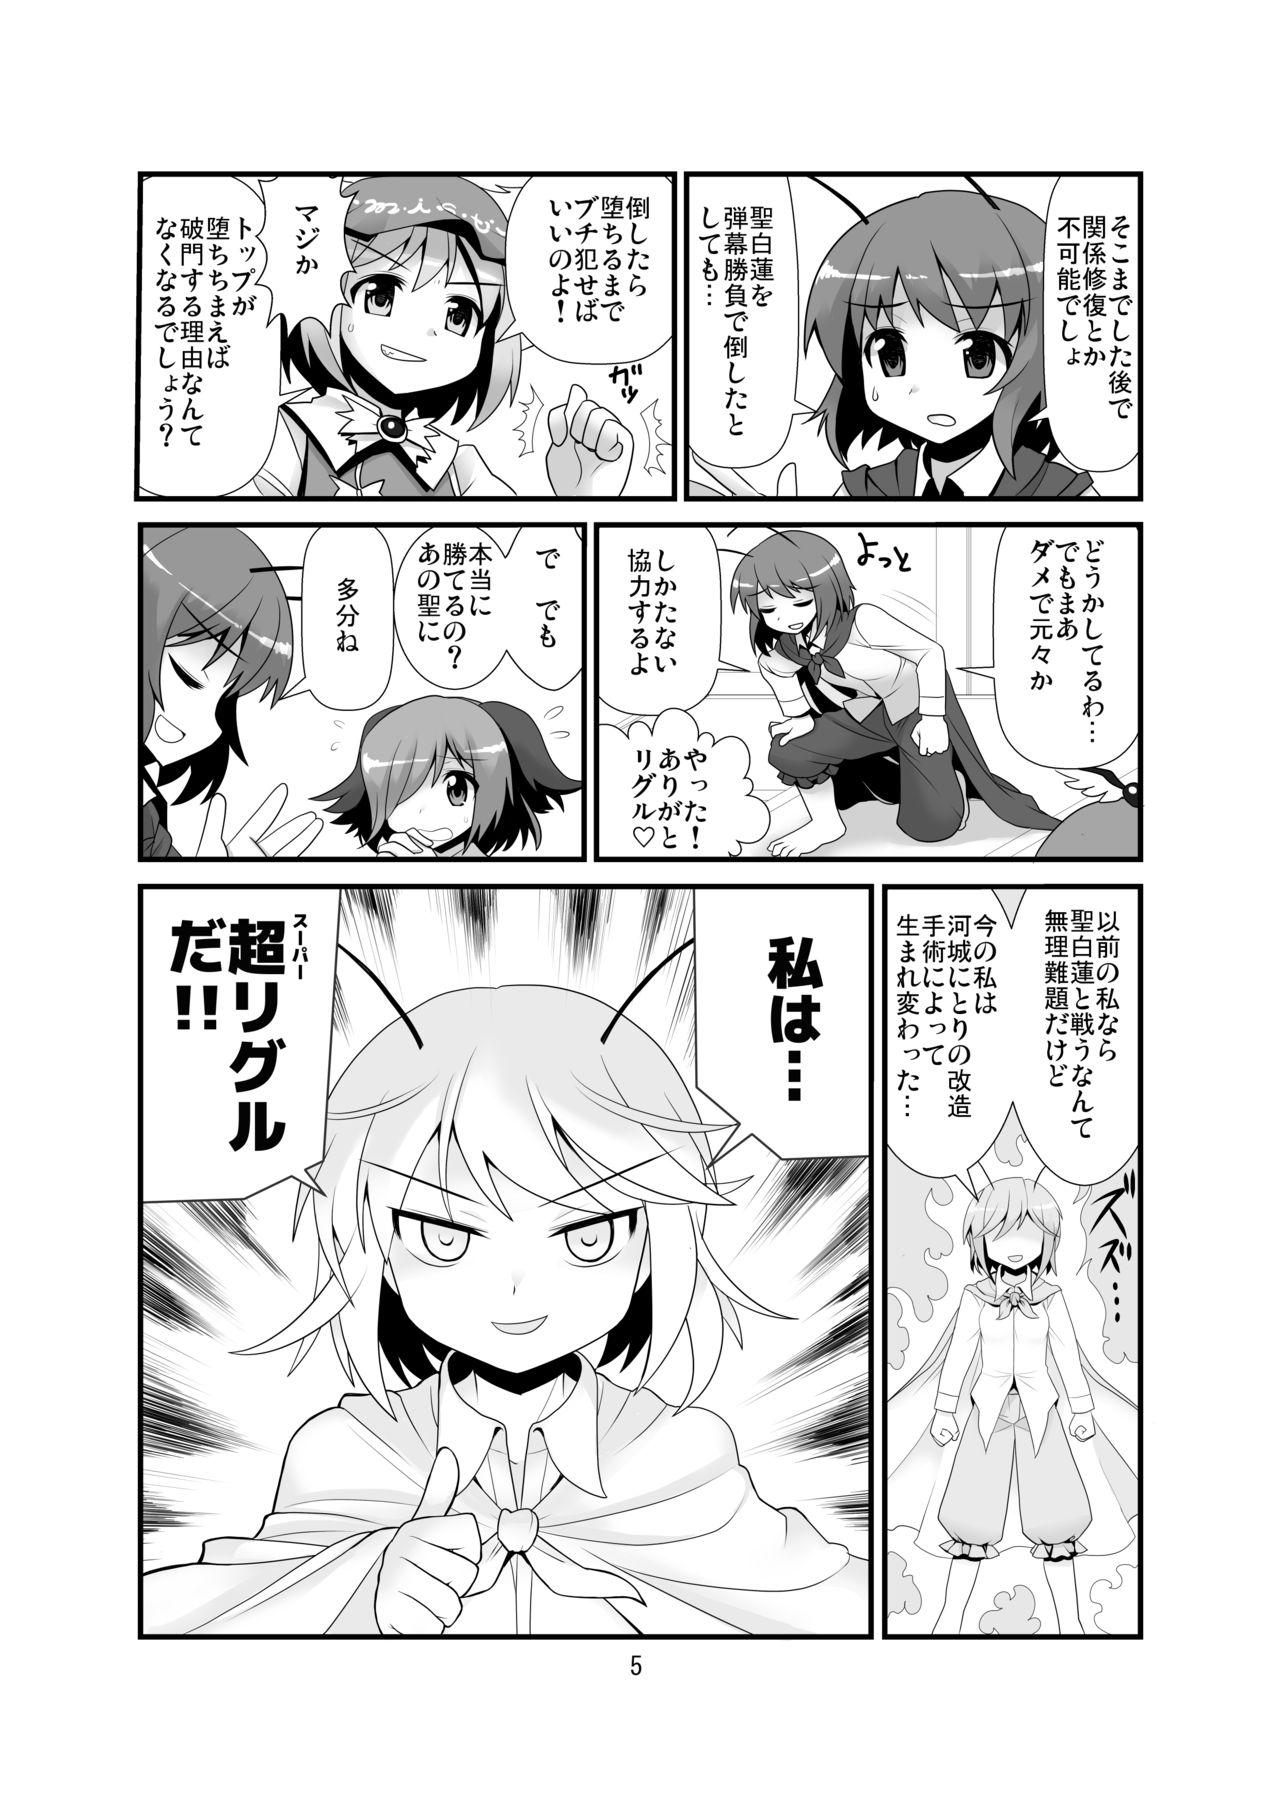 Fingers Super Wriggle Temple - Touhou project Petite Teenager - Page 6